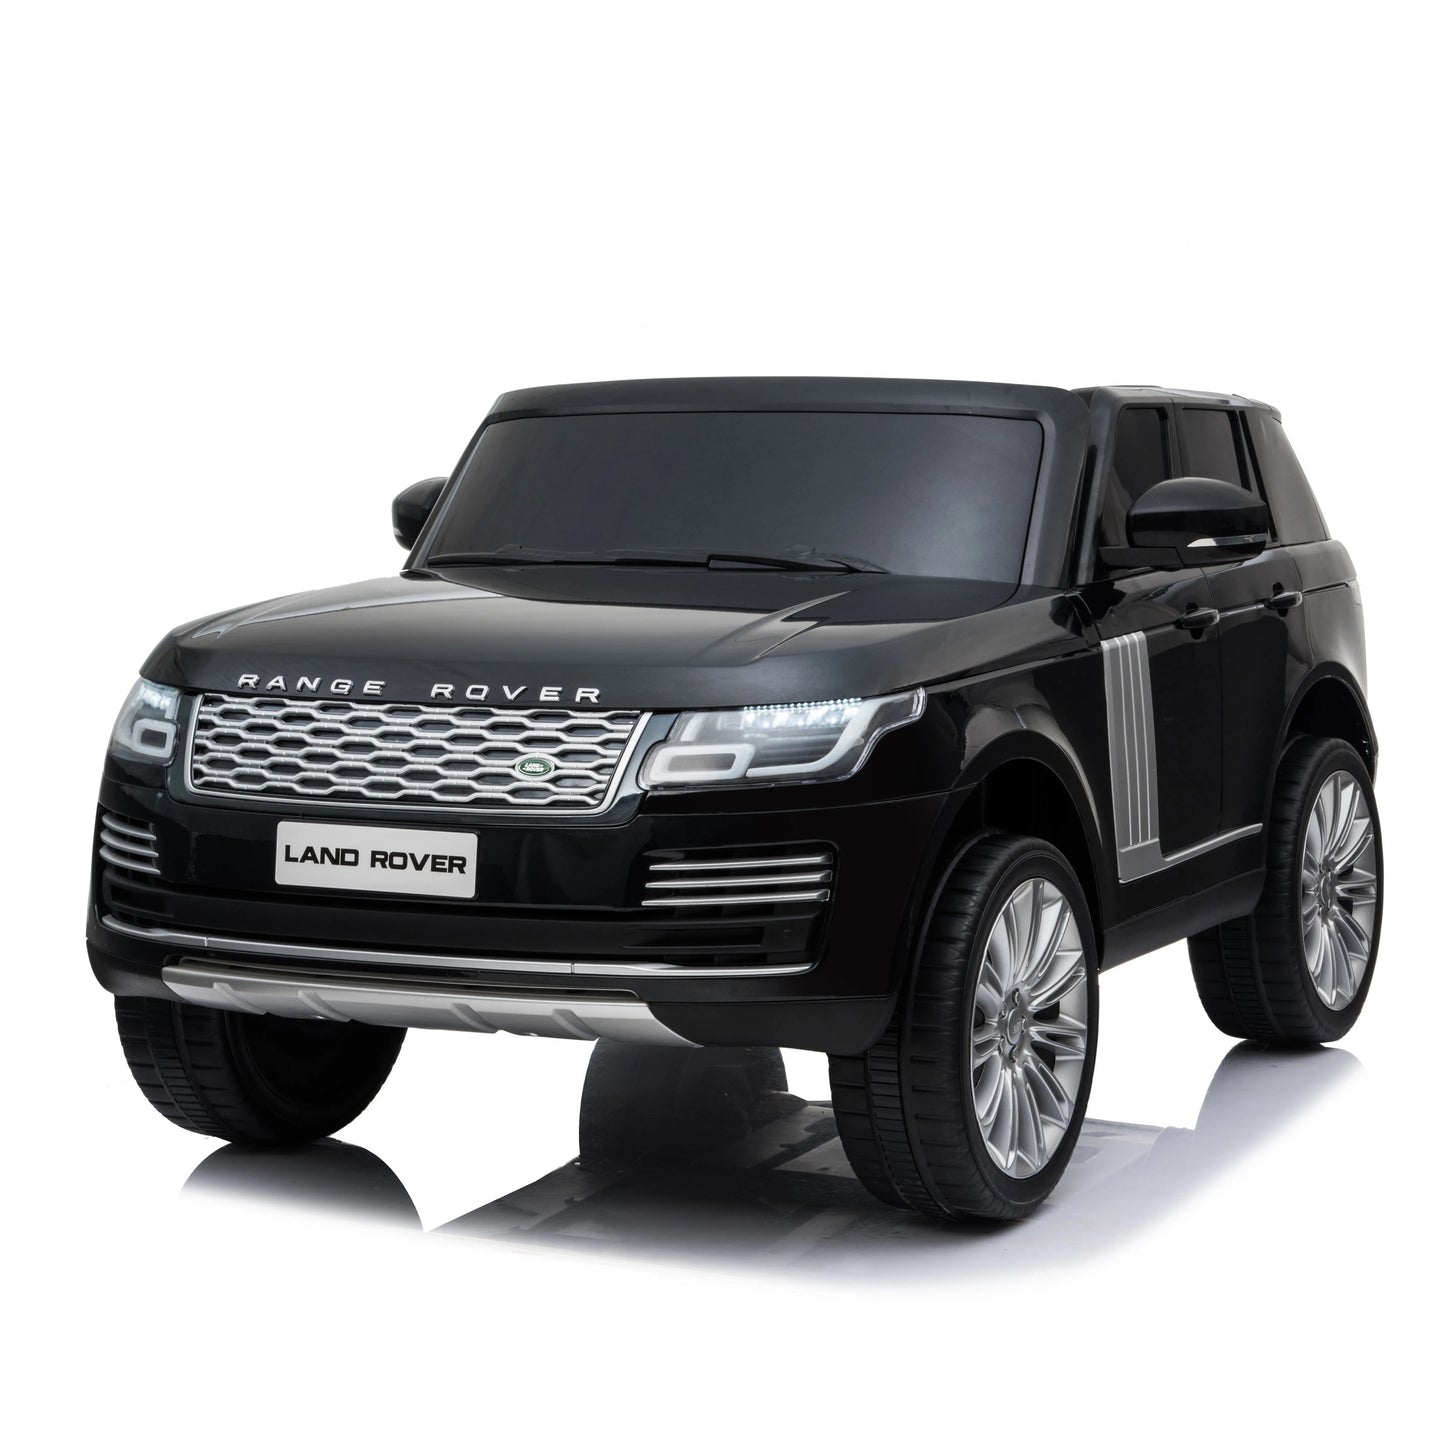 24V RANGE ROVER (TOUCHSCREEN TV, BLUETOOTH, RADIO, LEATHER SEATS, RUBBER WHEELS, REMOTE CONTROL)